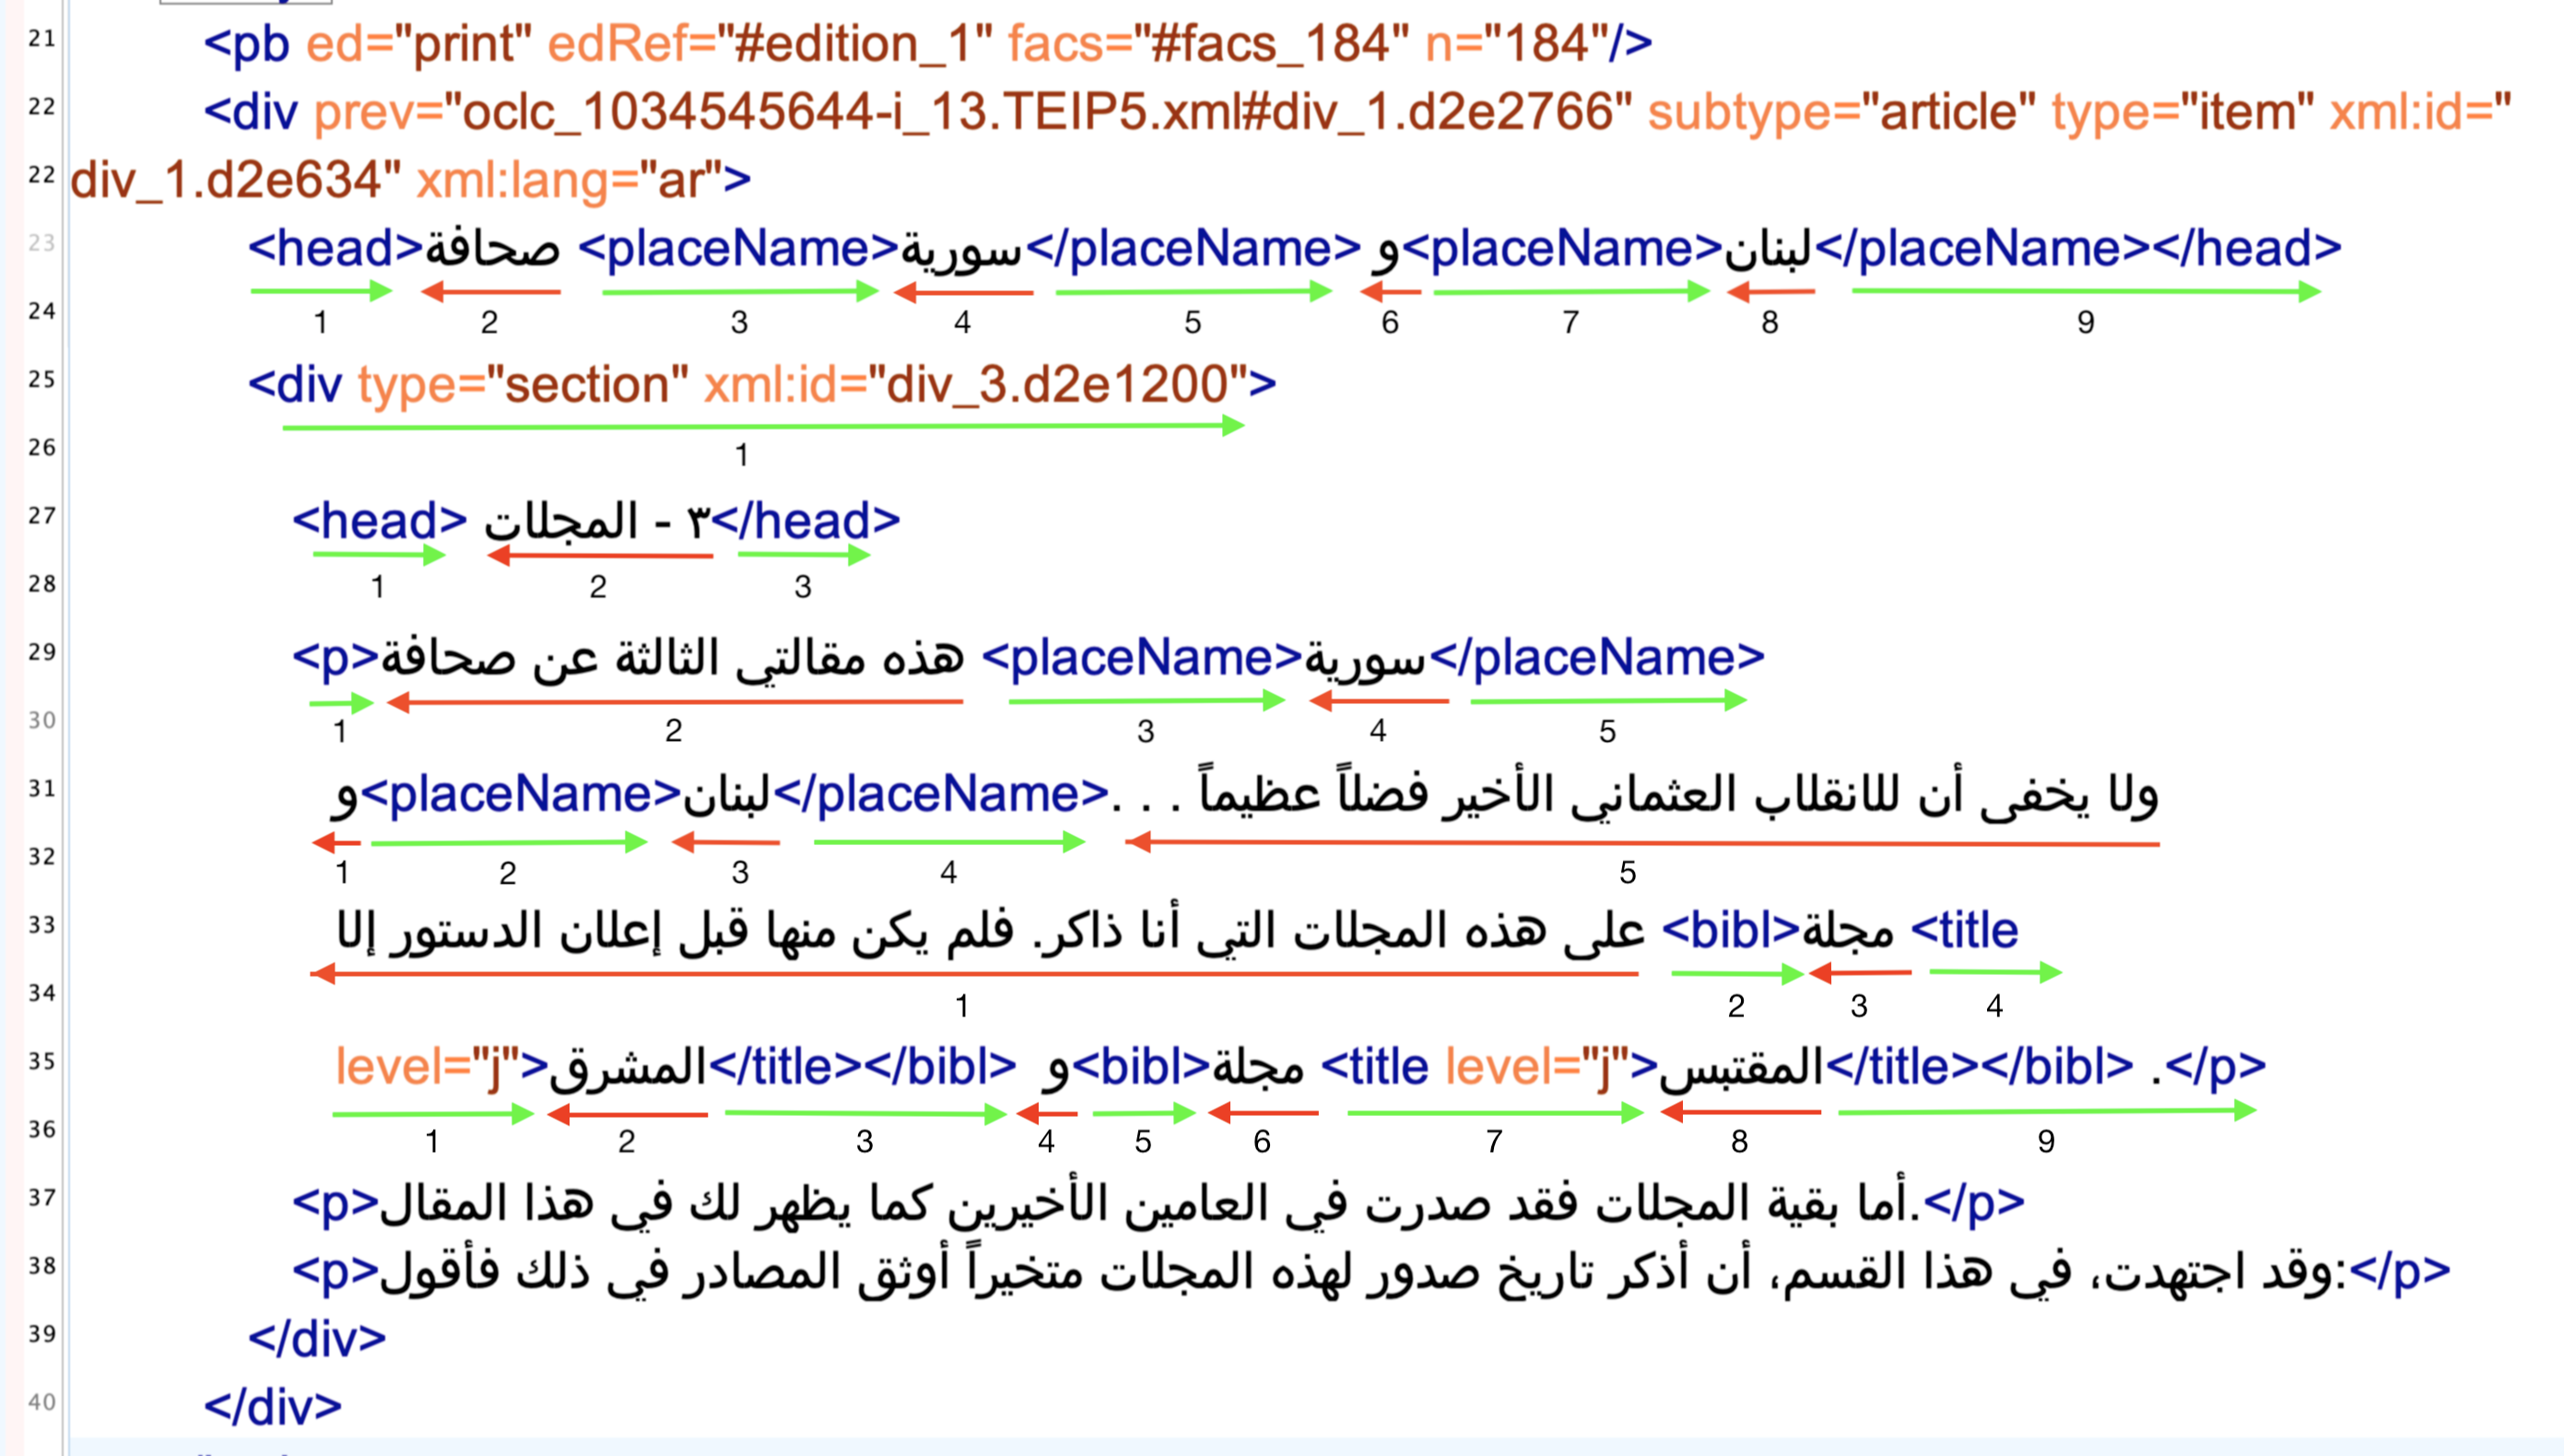 Example of bidirectional XML of (Dammūs 1911). The colored arrows indicate reading direction. The reading order is indicated by the numbers below the arrows